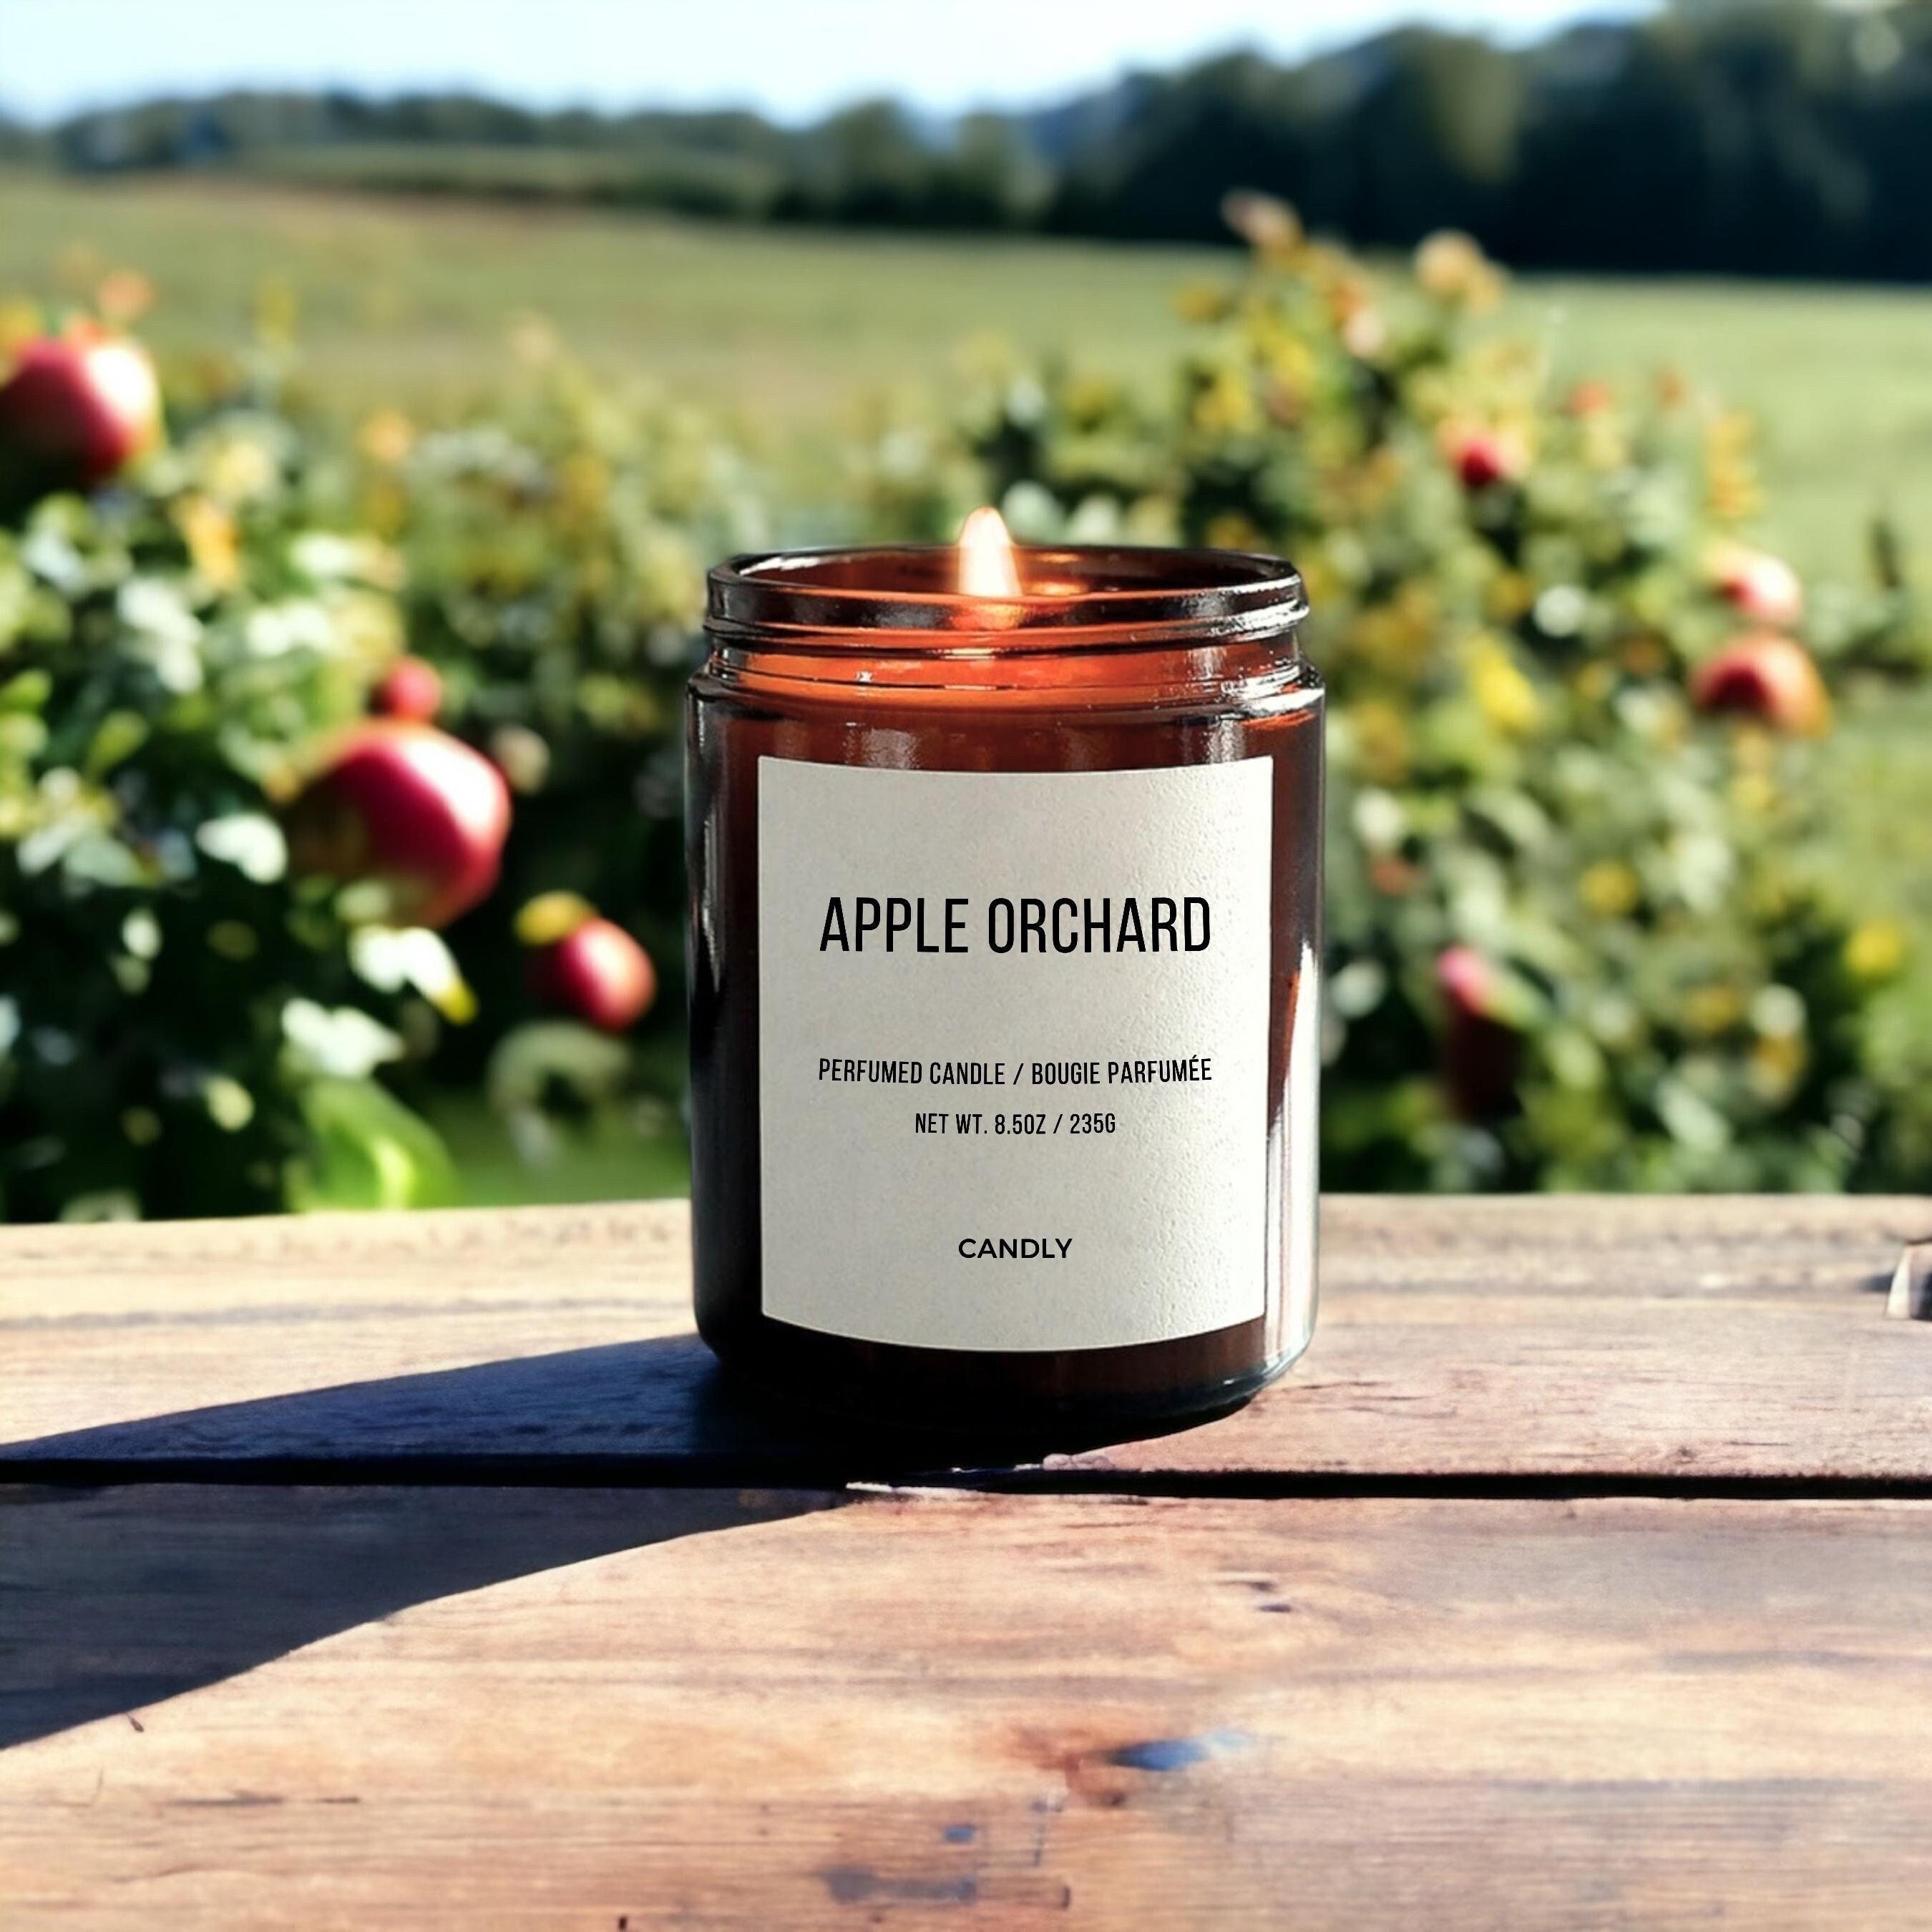  DW Home Apple Honey Butter 11.5 OZ Candle with Wooden